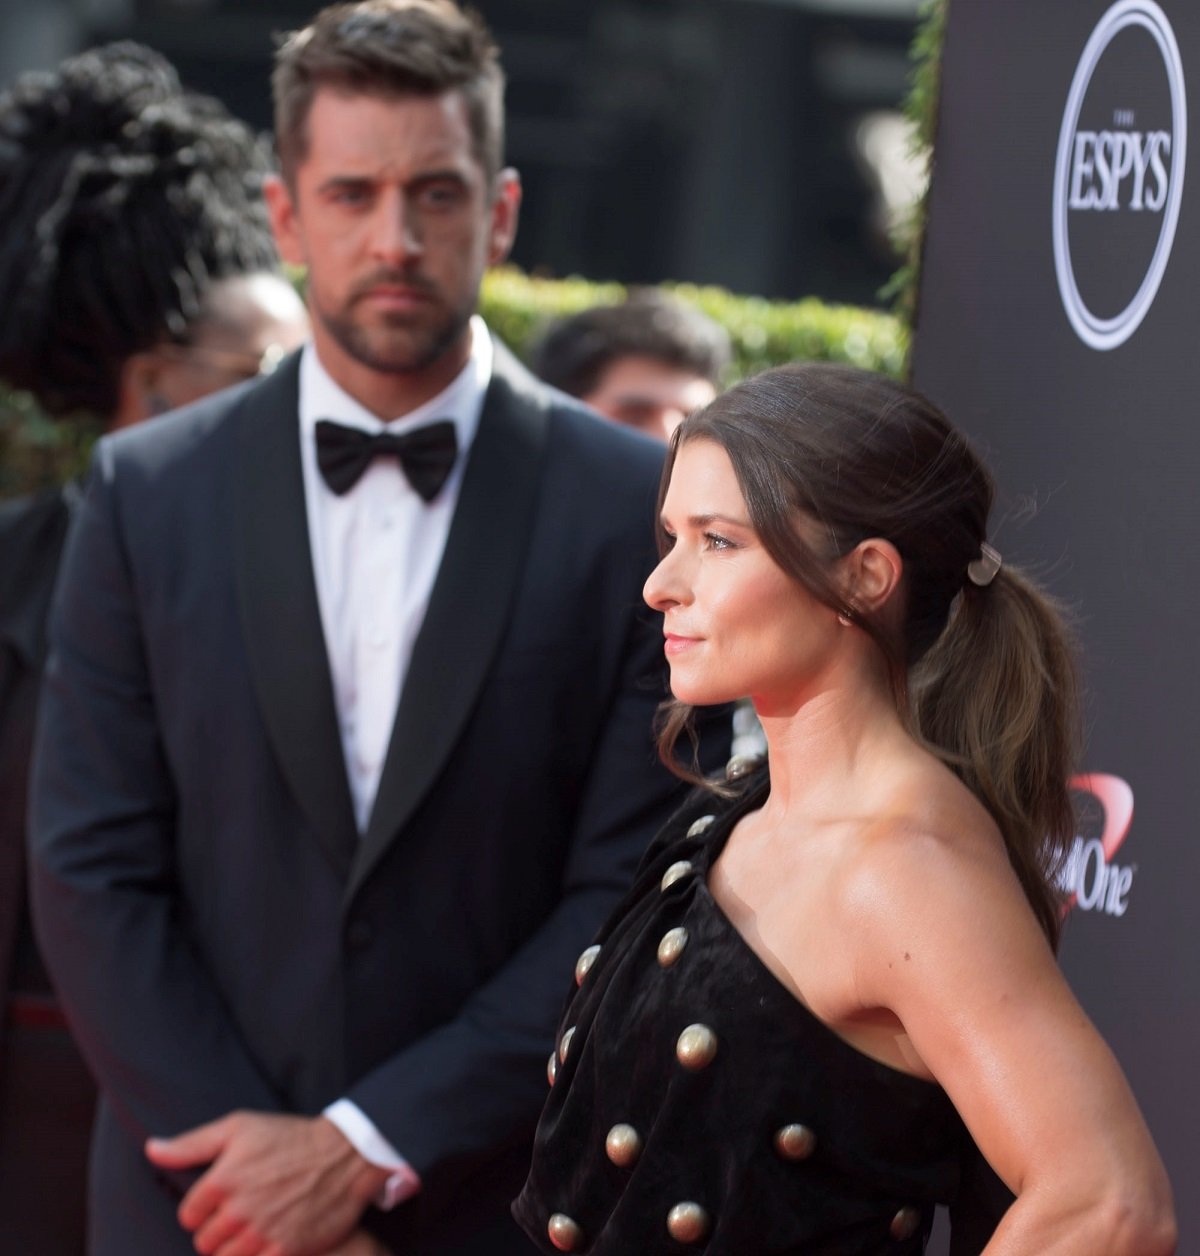 Danica Patrick posing on the ESPYS red carpet while Aaron Rodgers looks on